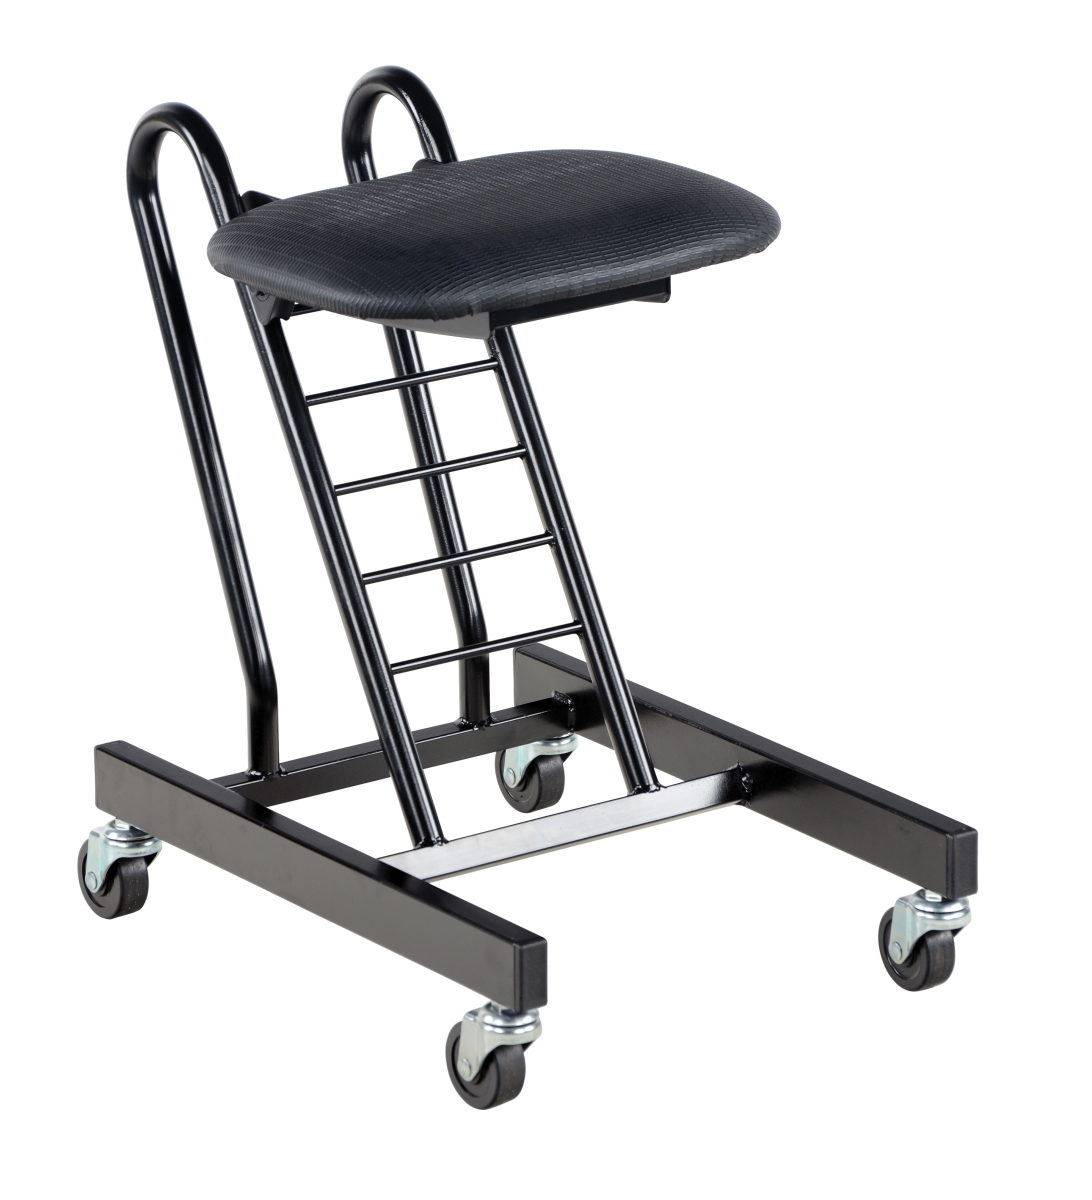 Cpro-100 Portable Ergonomic Worker Chair